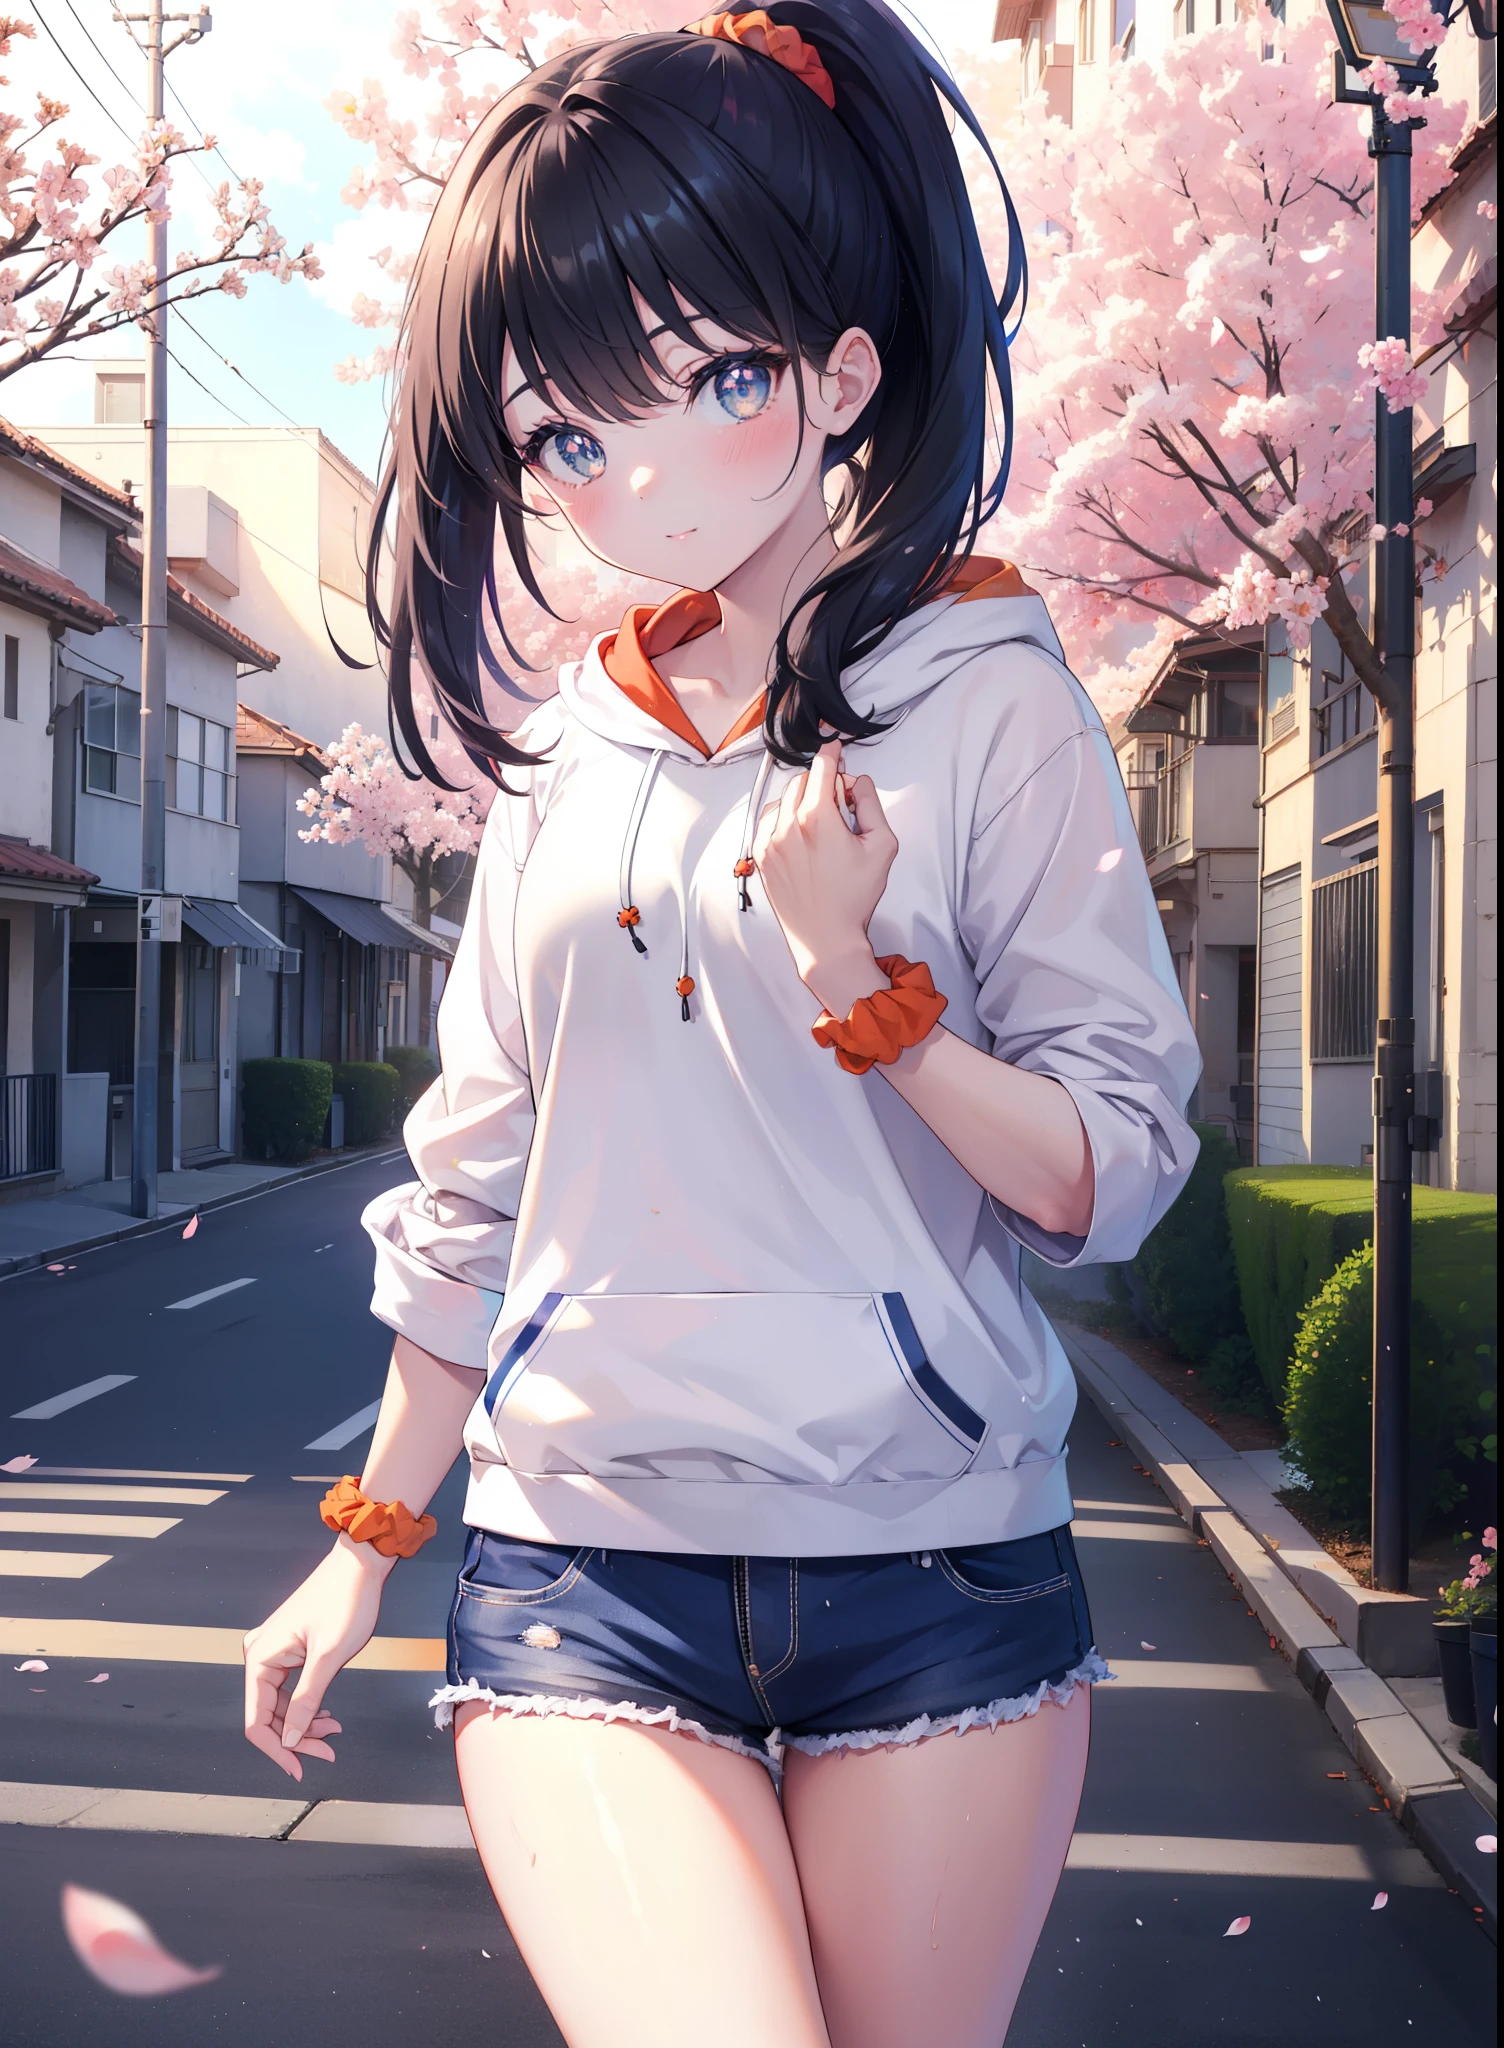 It&#39;s a good body, rikka takarada, black hair, blue eyes, long hair, orange Scrunchie, Scrunchie, wrist Scrunchie,ponytail,smile,blush,open your mouth,oversized red hoodie,shorts,black stockings,short boots,morning,morning日,the sun is rising,cherry blossoms are blooming,Cherry blossoms are scattered,
break outdoors, In town,residential street,
break looking at viewer, (cowboy shot:1.5),
break (masterpiece:1.2), highest quality, High resolution, unity 8k wallpaper, (figure:0.8), (detailed and beautiful eyes:1.6), highly detailed face, perfect lighting, Very detailed CG, (perfect hands, perfect anatomy),